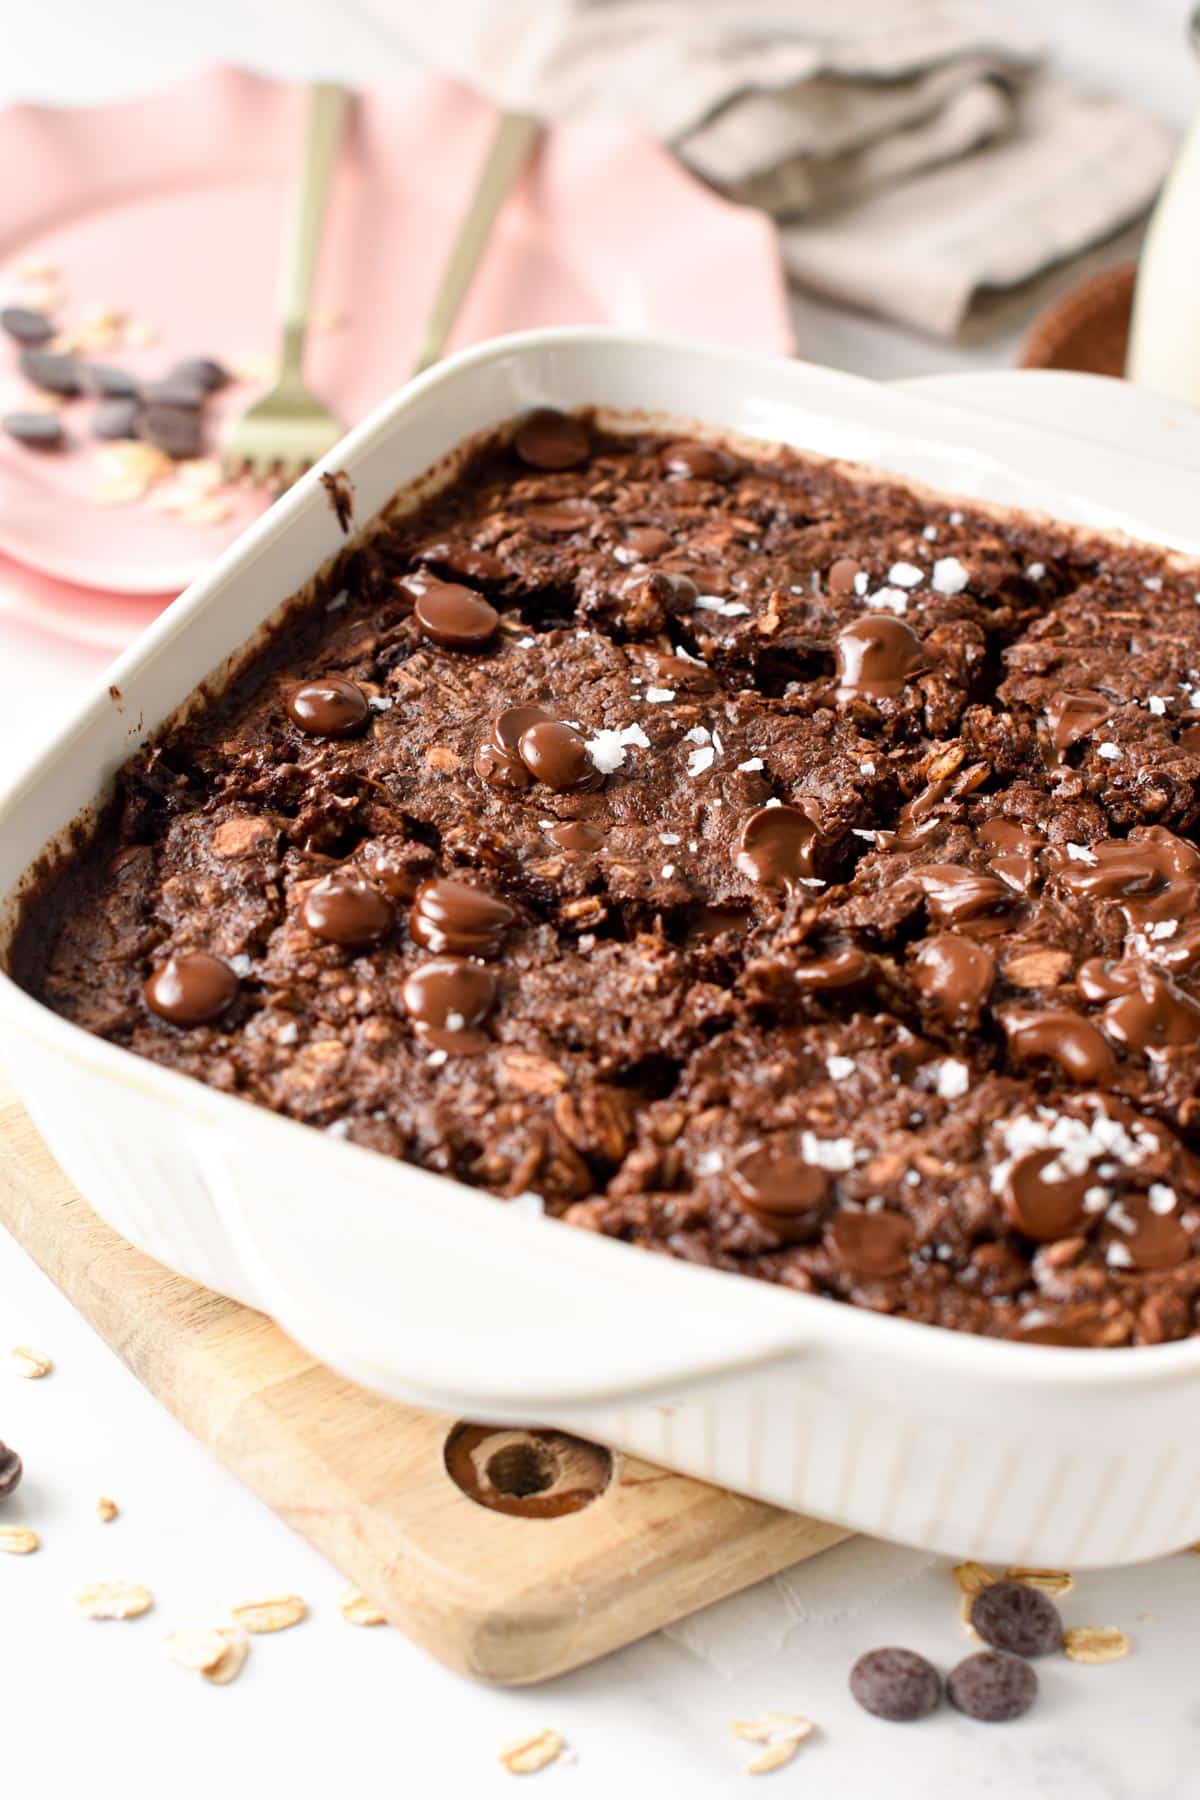 This Baked Brownie Oatmeal is a creamy chocolate baked oatmeal recipe filled with 9 grams of protein per serving for a healthy breakfast.